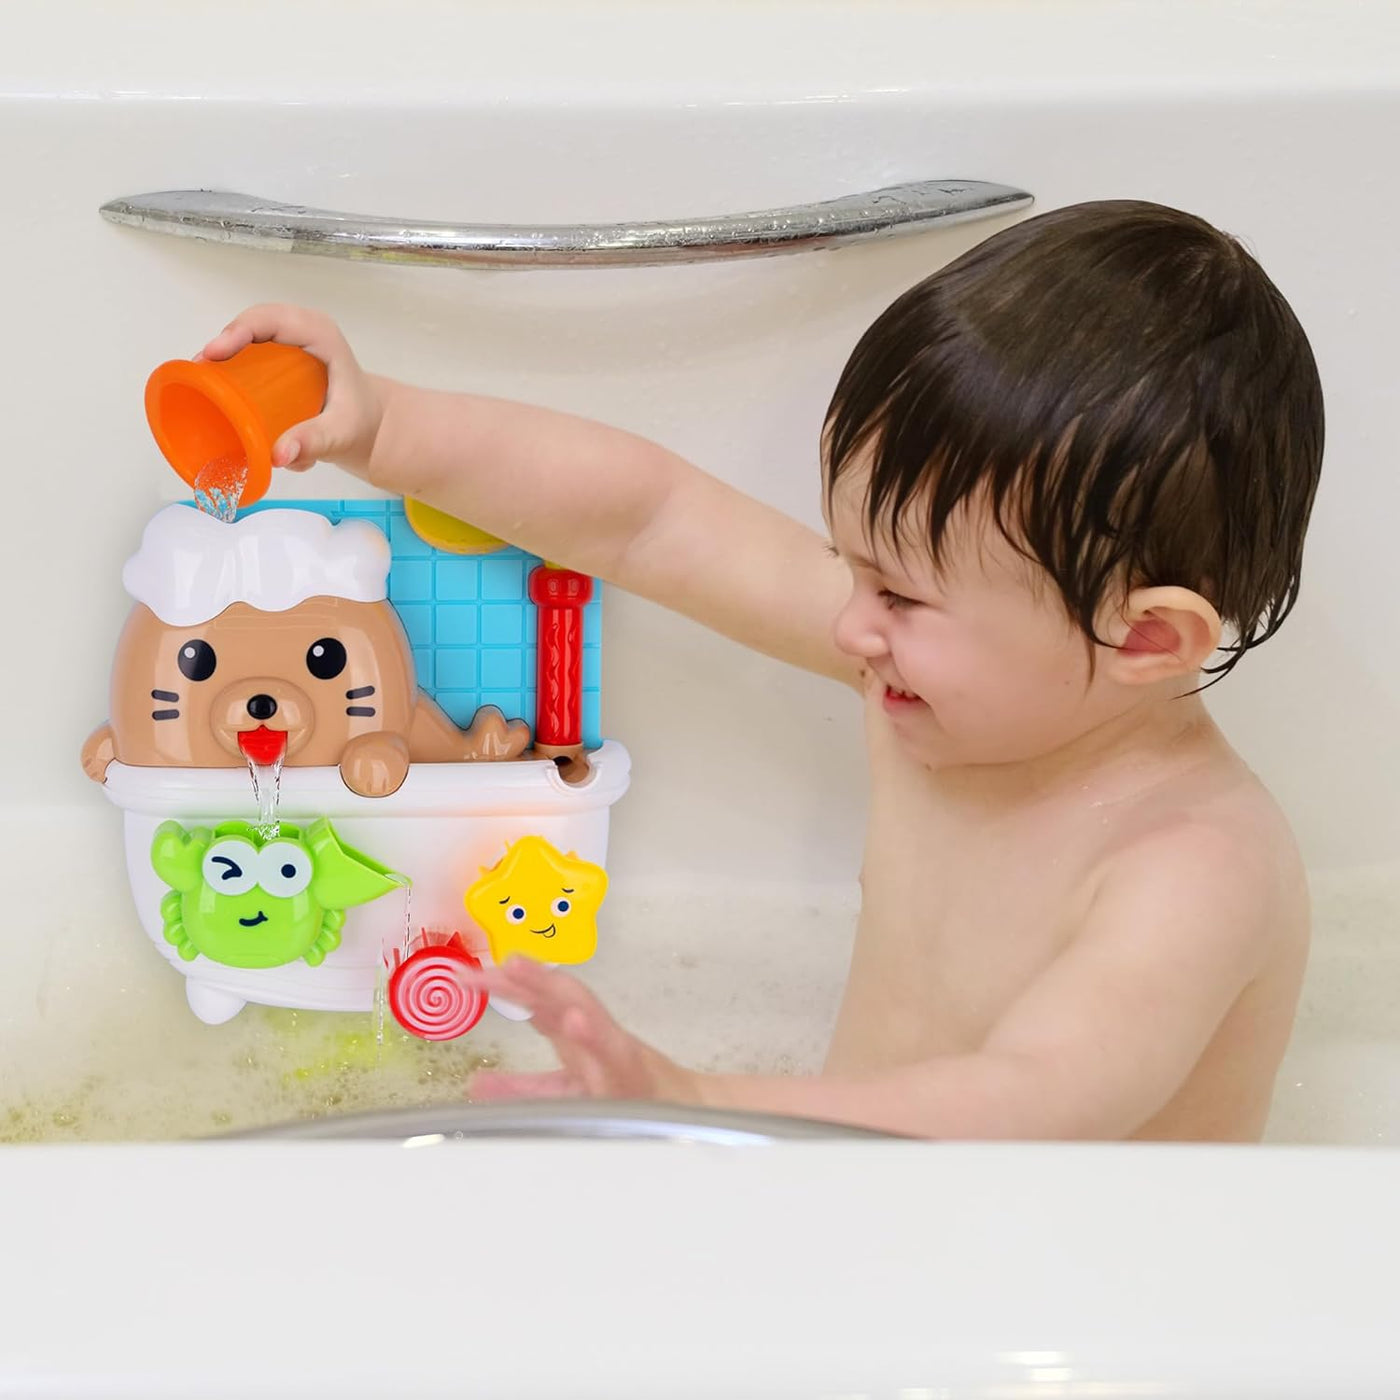 ArtCreativity Sea Lion Bath Toy for Kids - Waterfall Bath Toy with Bobbing Crab, Spinning Wheel, and Strong Suction Cups - Fun Suction Bath Toys for Toddler Tub Time Ages 1 2 3 4 5